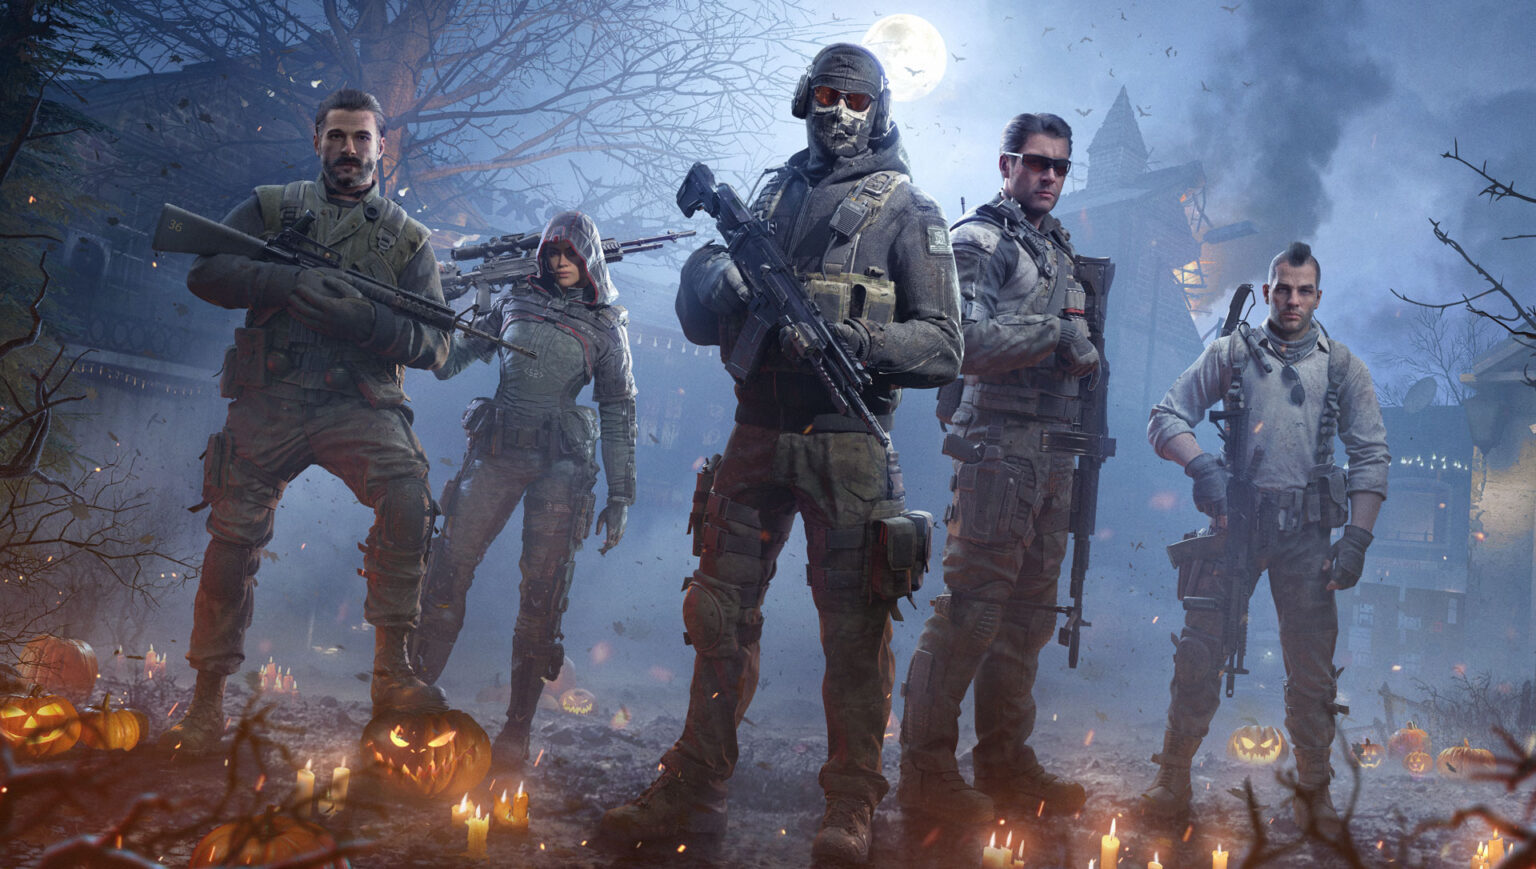 'Call Of Duty’s Warzone' is bringing the fun with its Halloween event this year. Find out what you need to do to prepare.